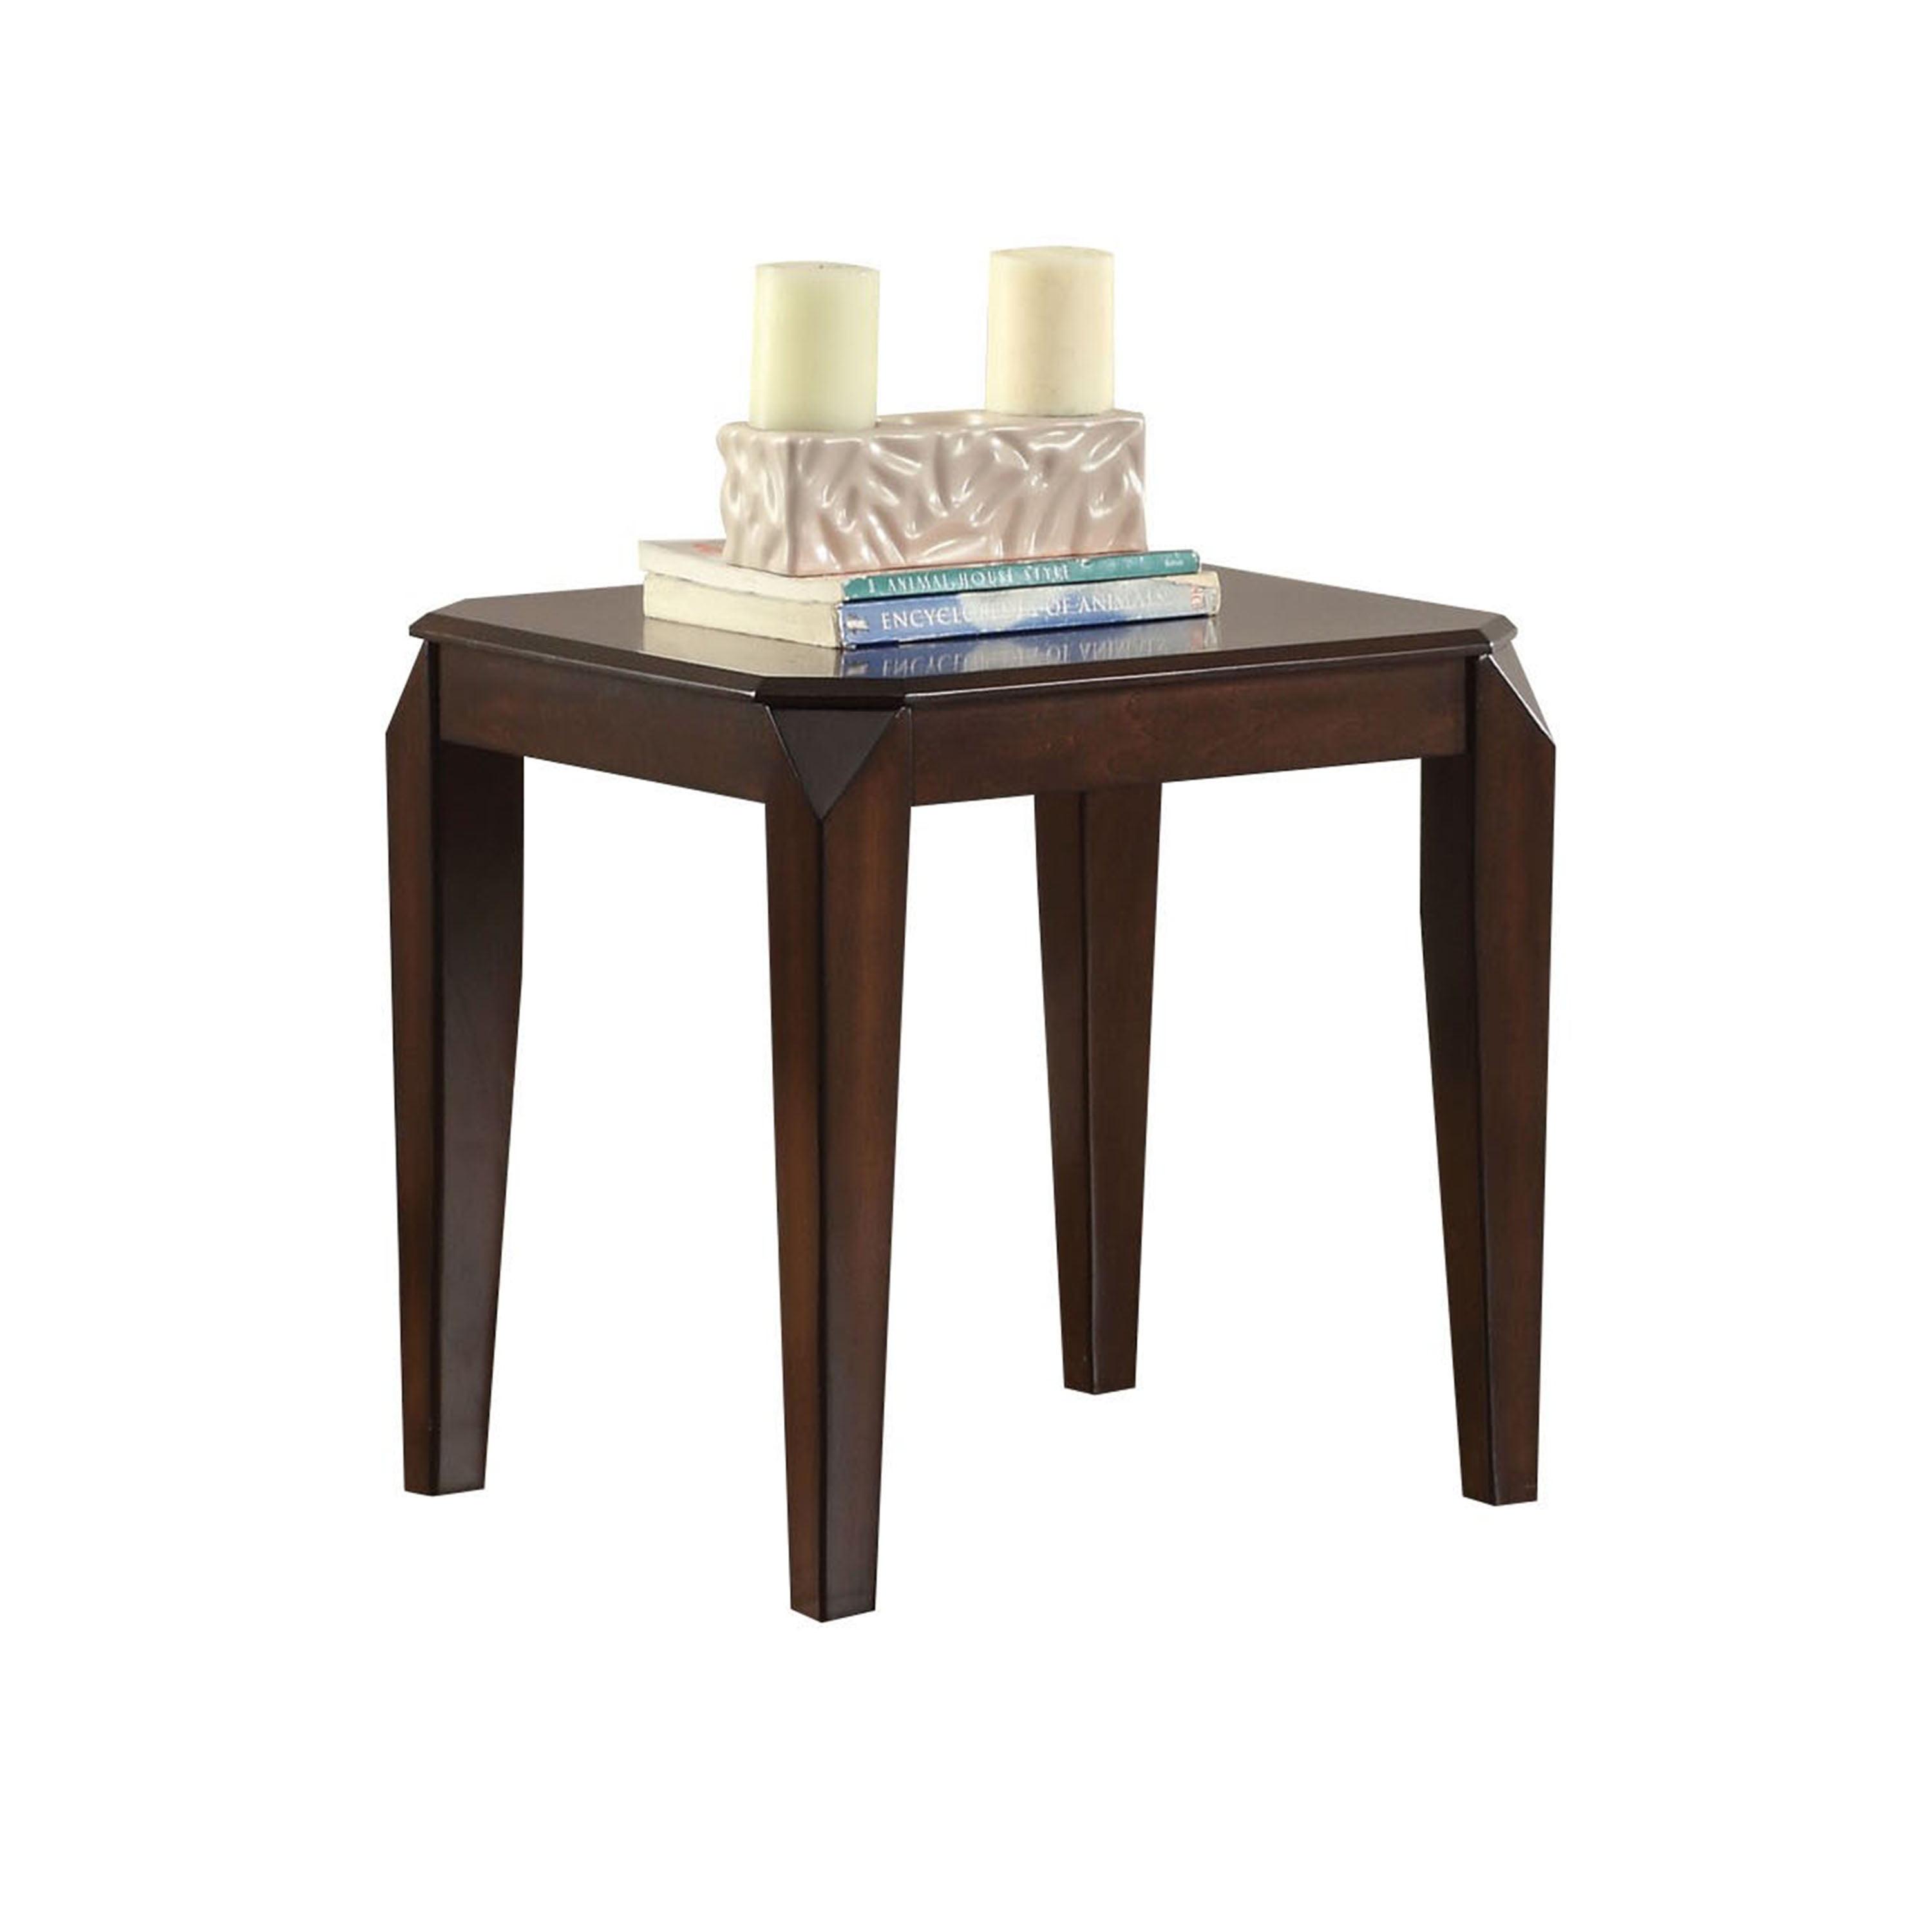 Elegant Walnut Square End Table with Beveled Legs